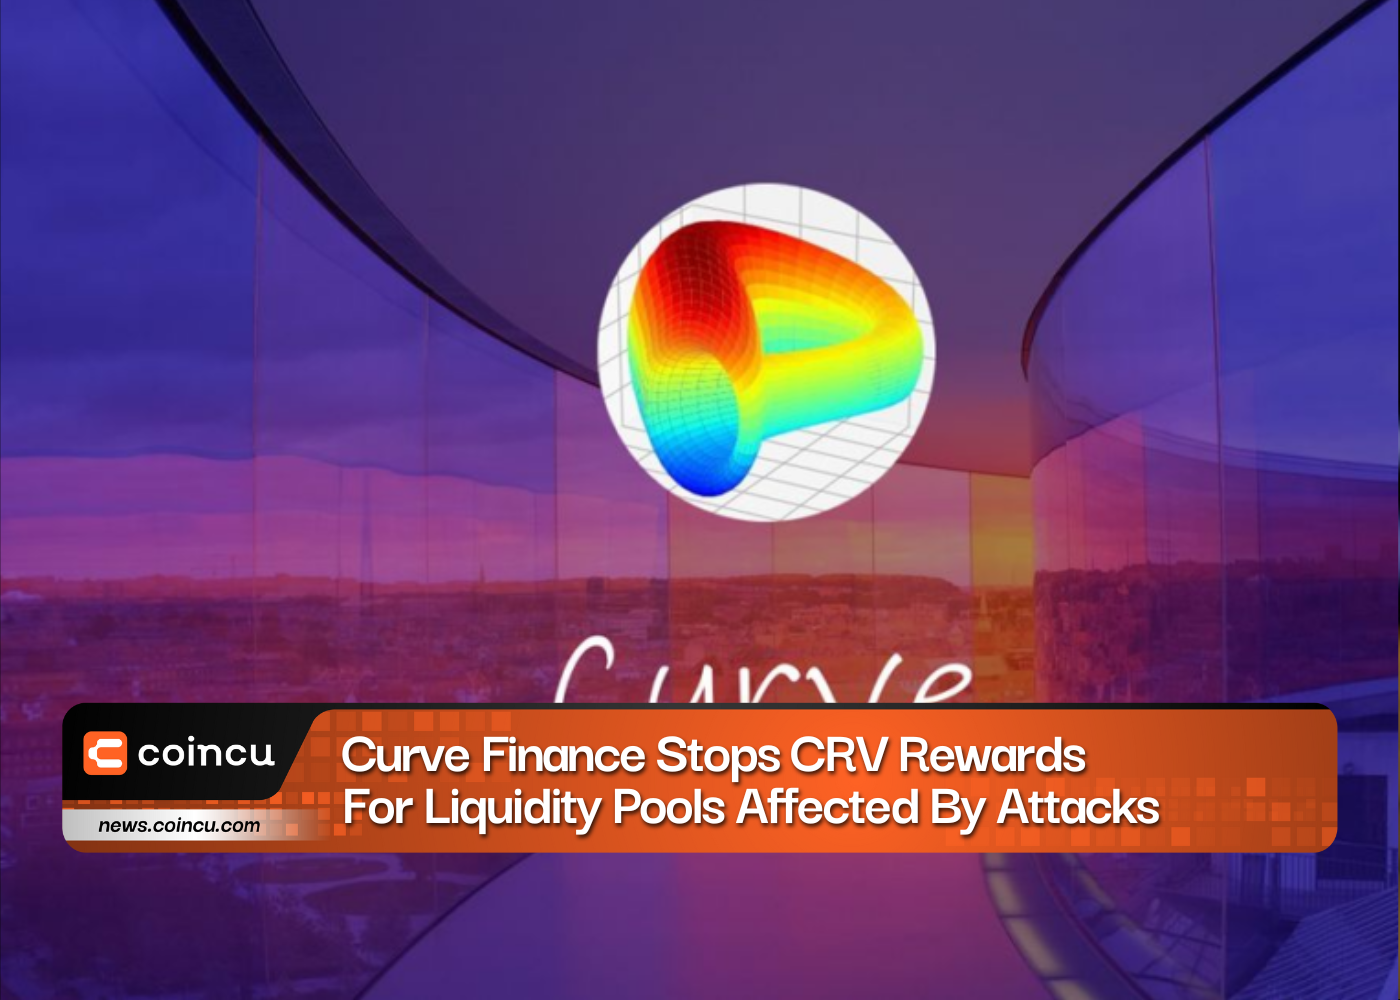 Curve Finance Stops CRV Rewards For Liquidity Pools Affected By Attacks